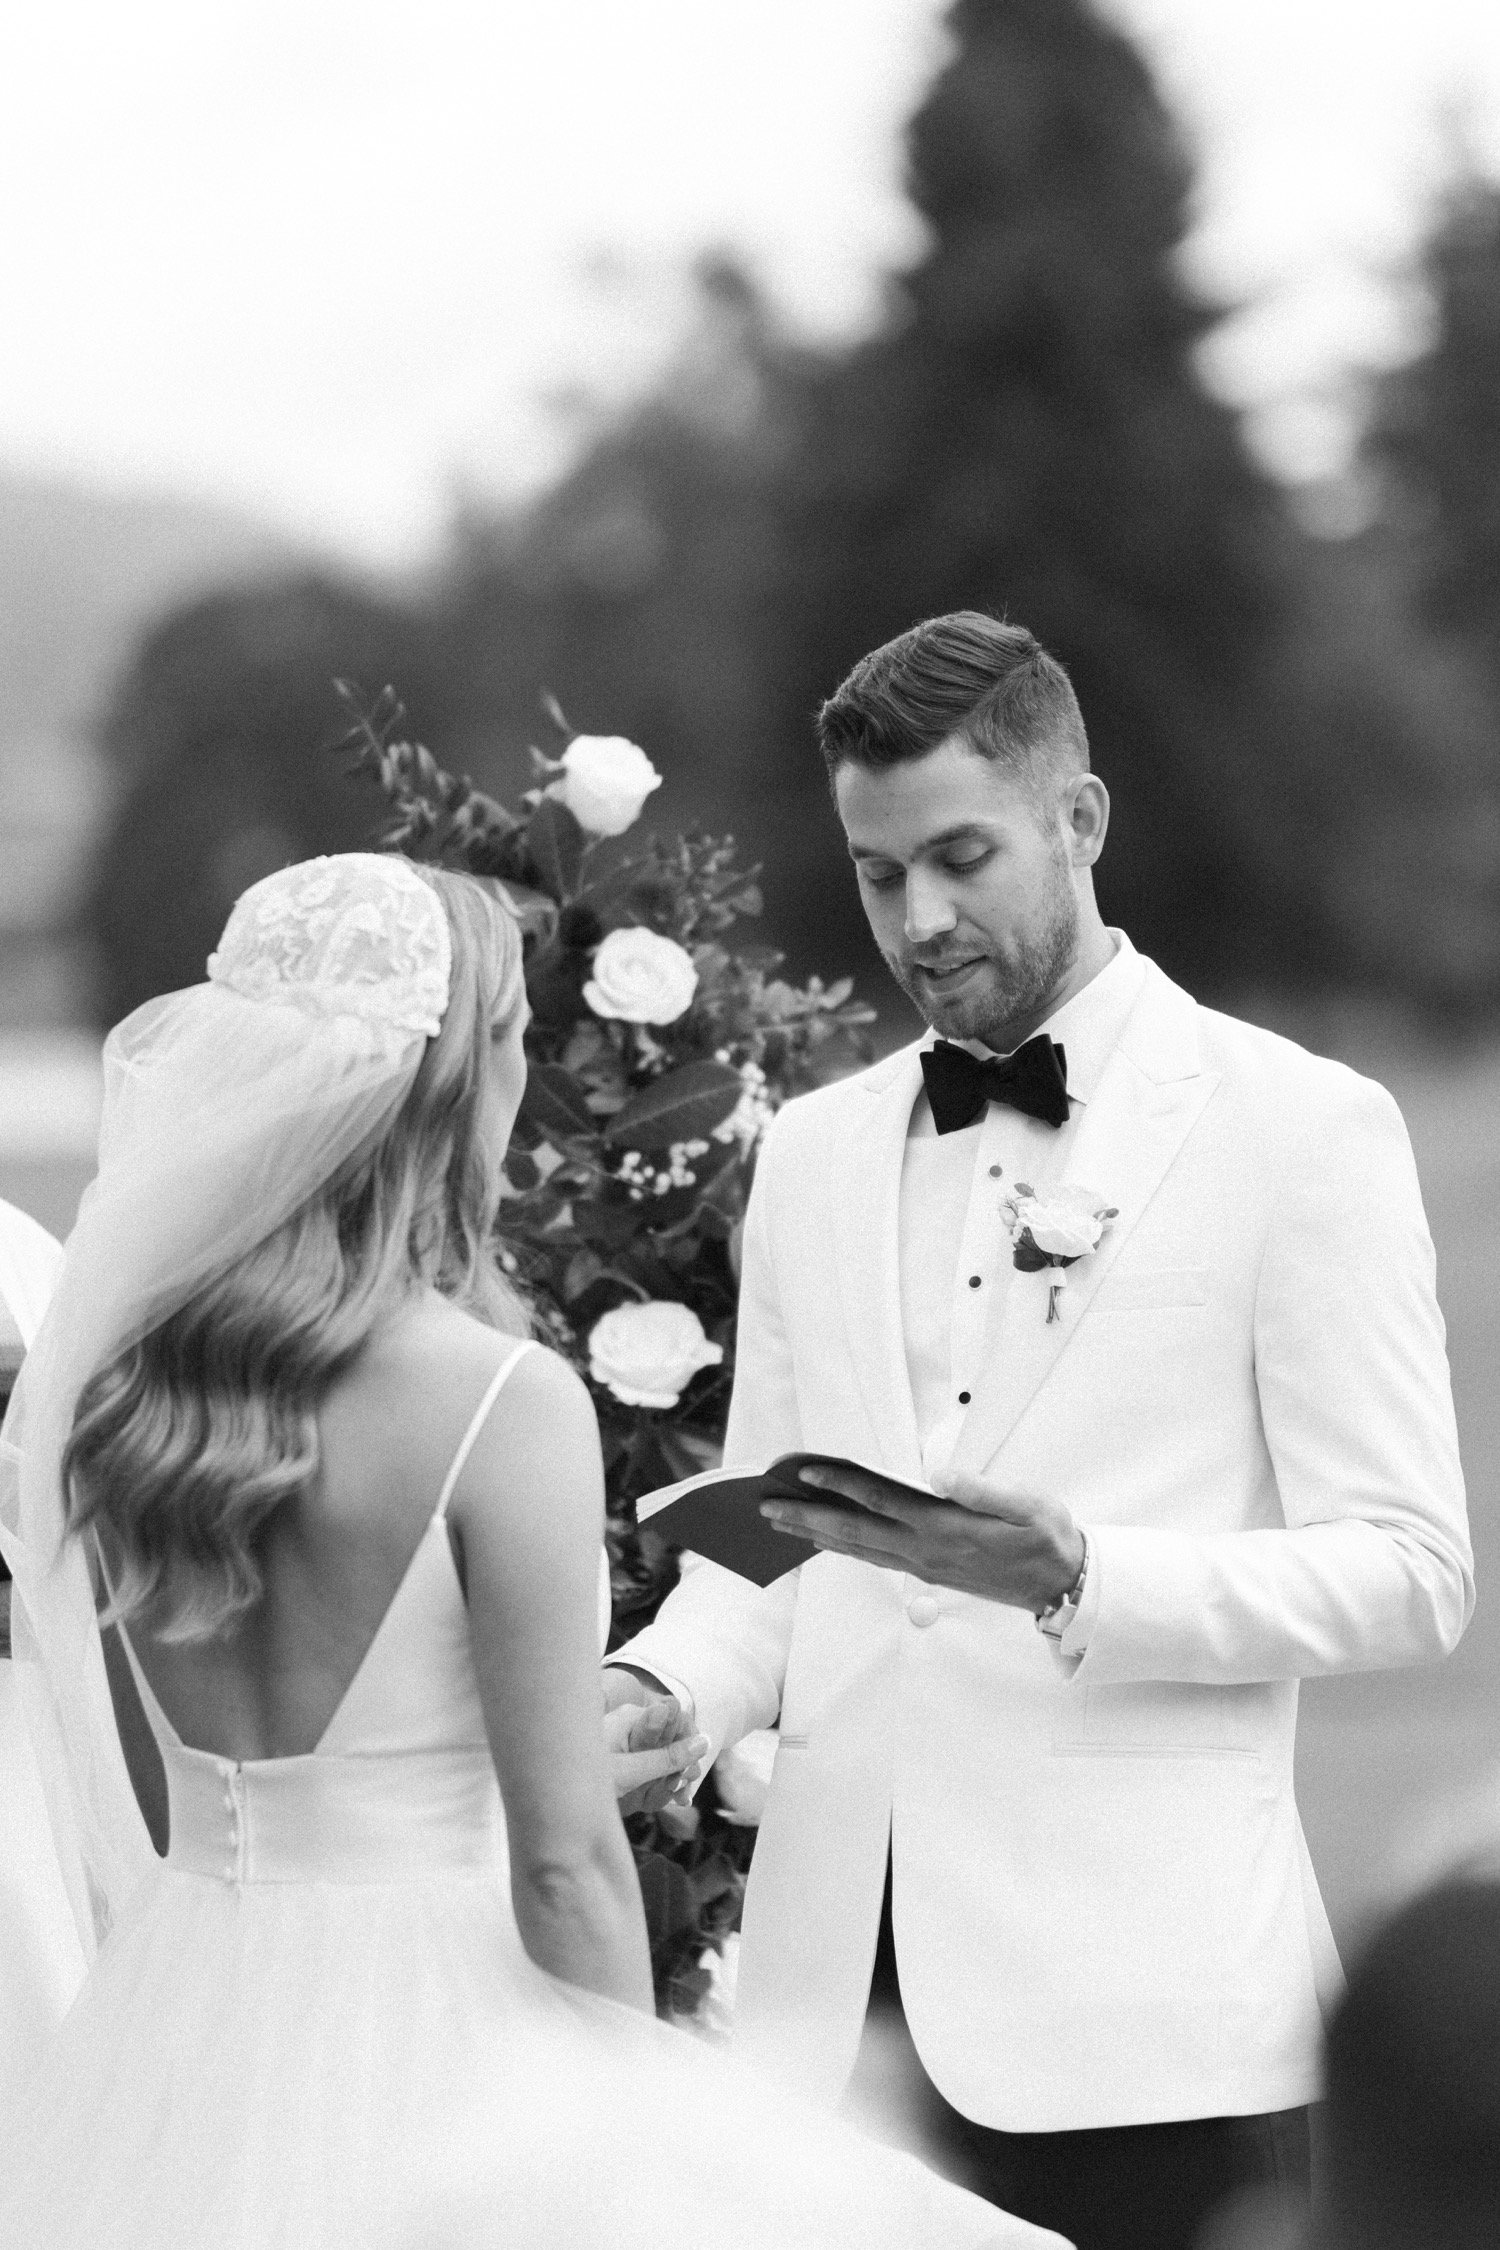  Man in white suit jacket reads wedding vows from small notebook 